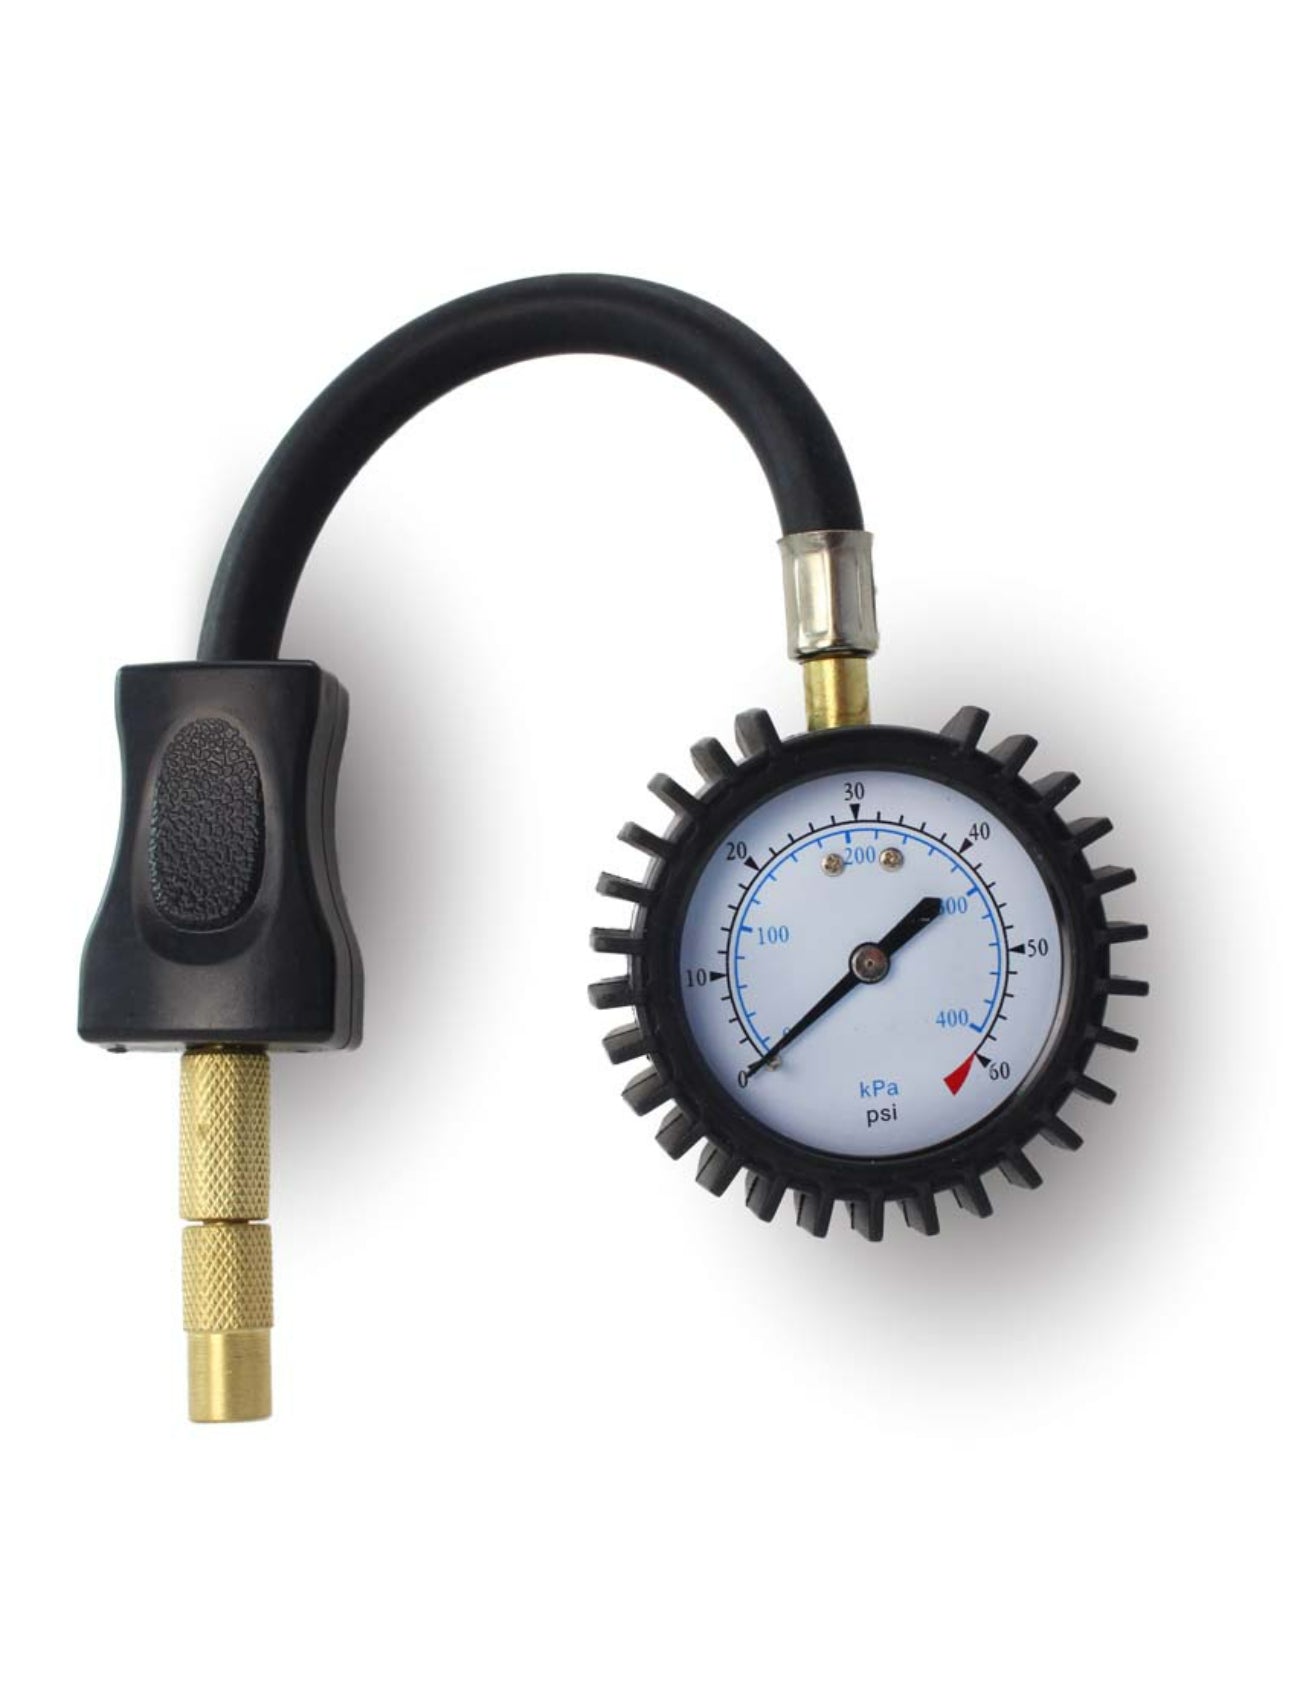 TYRE GAUGE 3 IN 1 WITH AIR HOSE 10-60psi